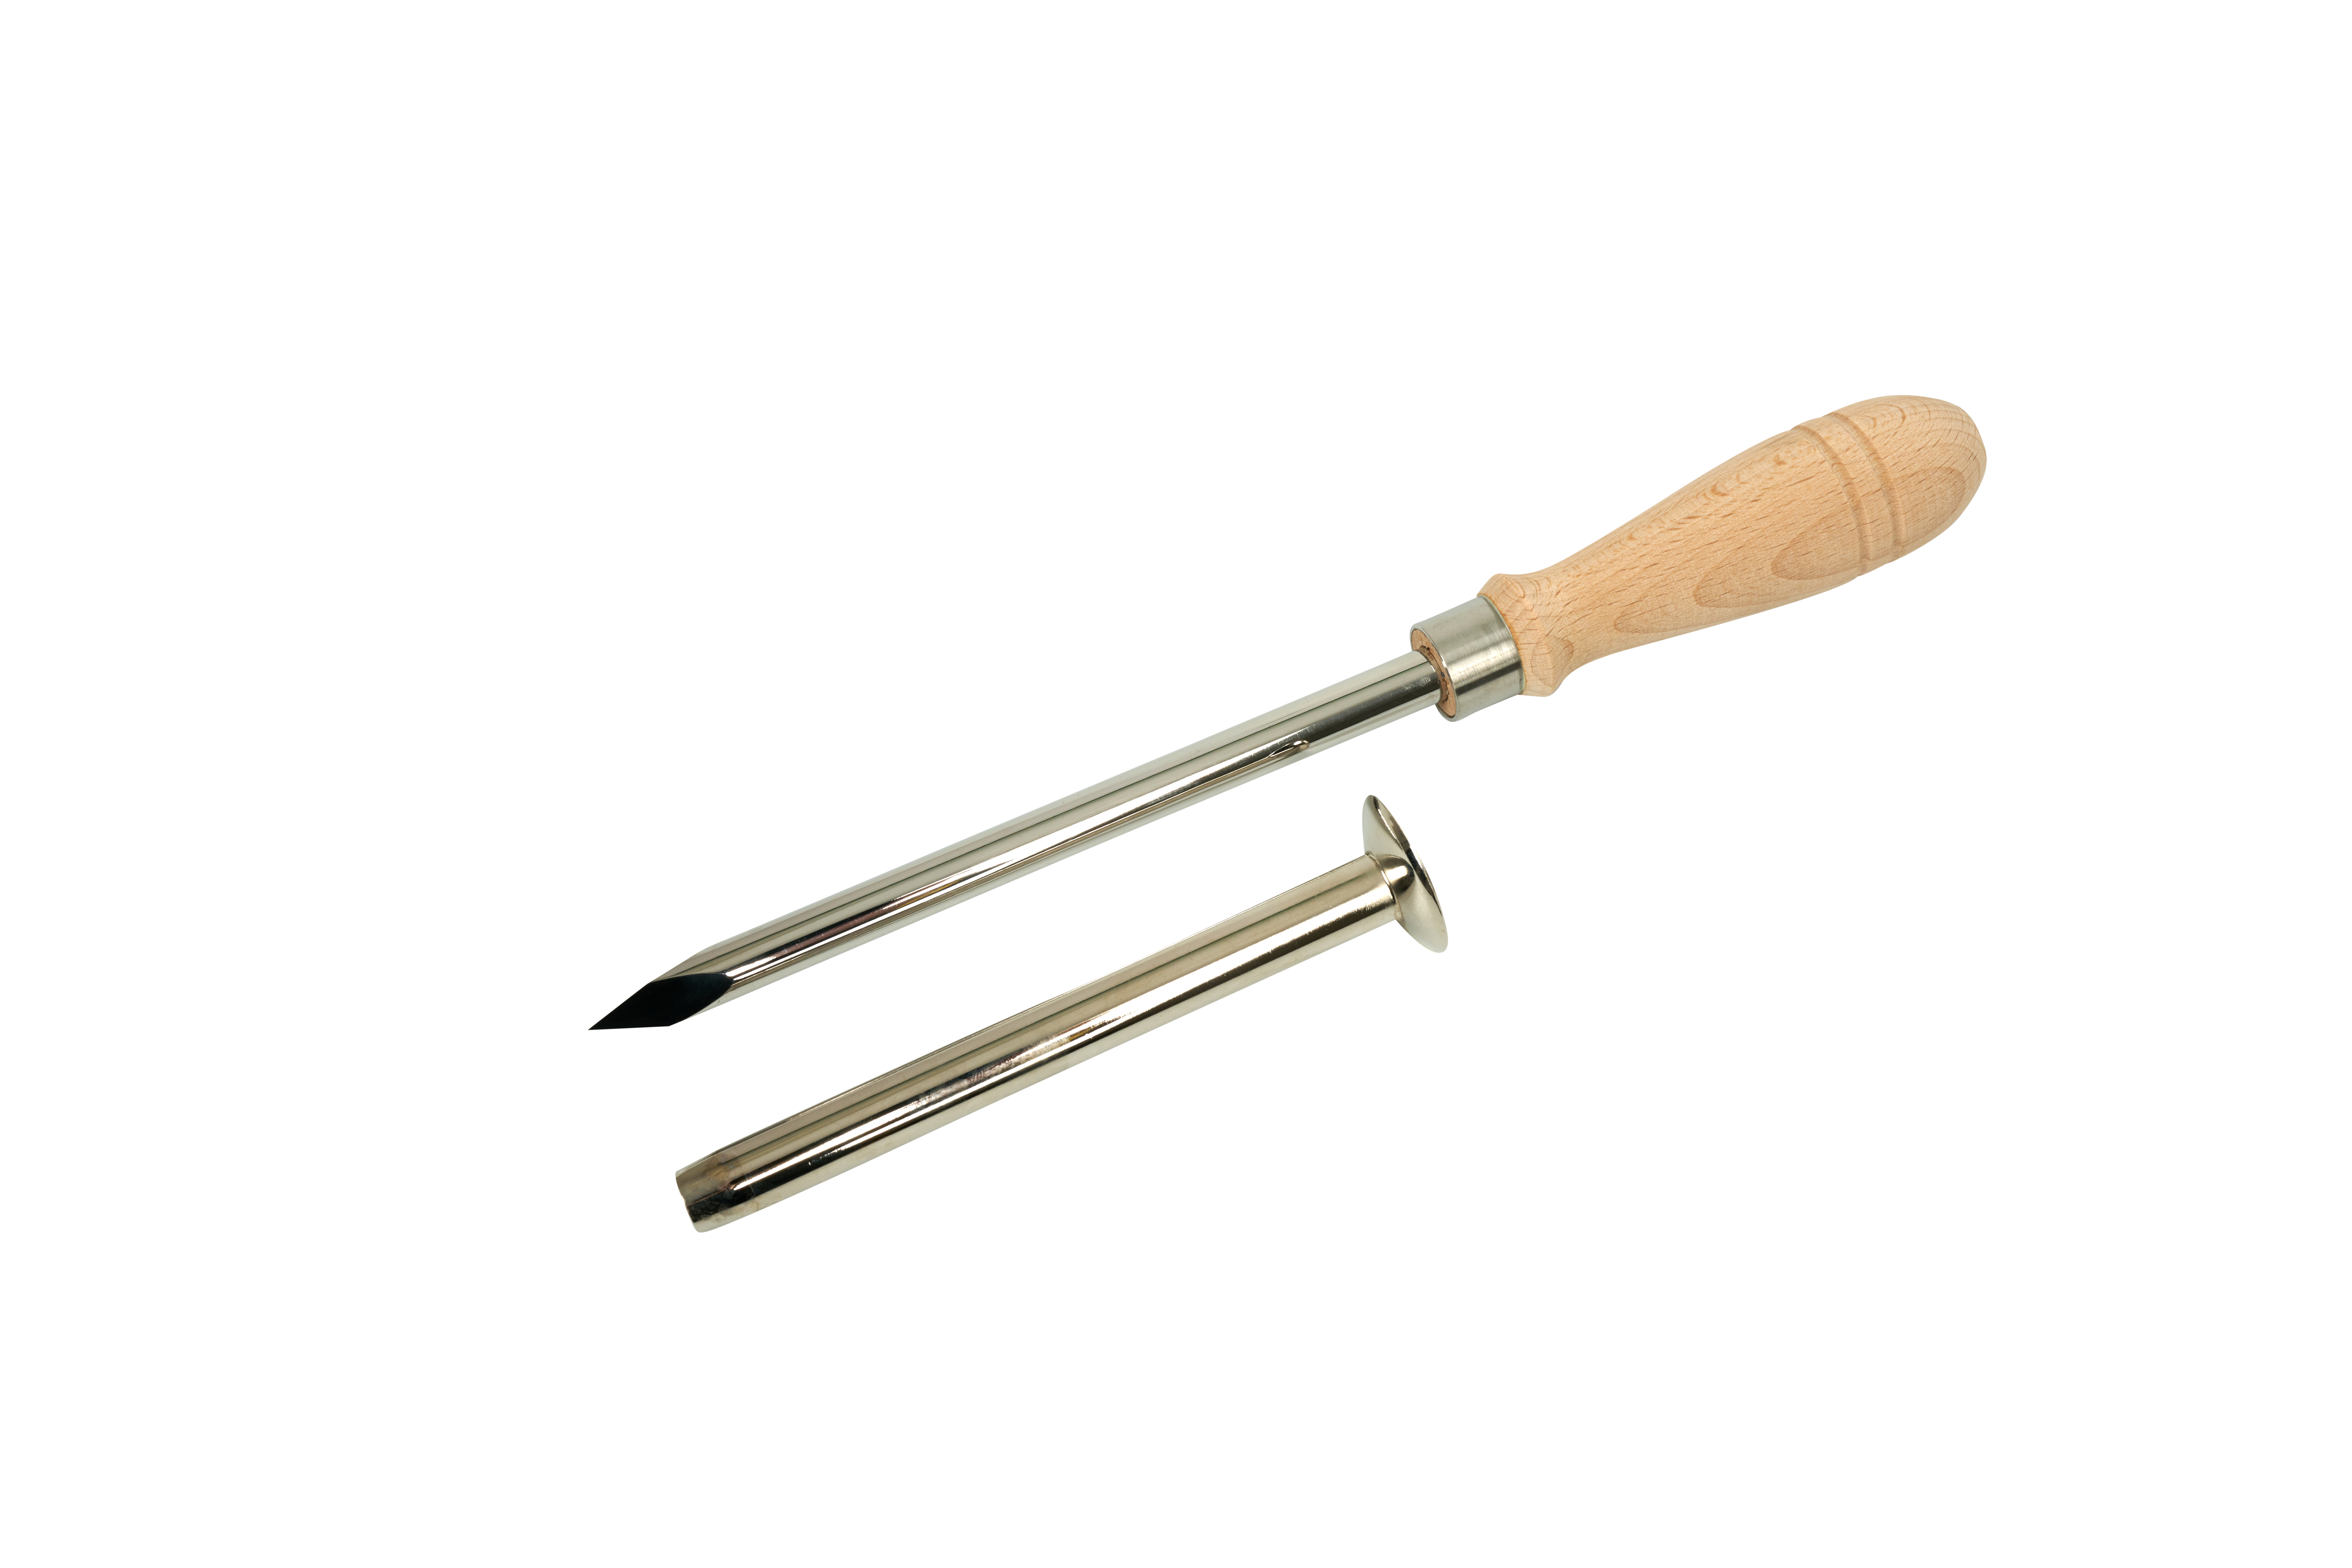 KRUUSE Trocar 10x150 mm w/wooden handle for cows, with cannula